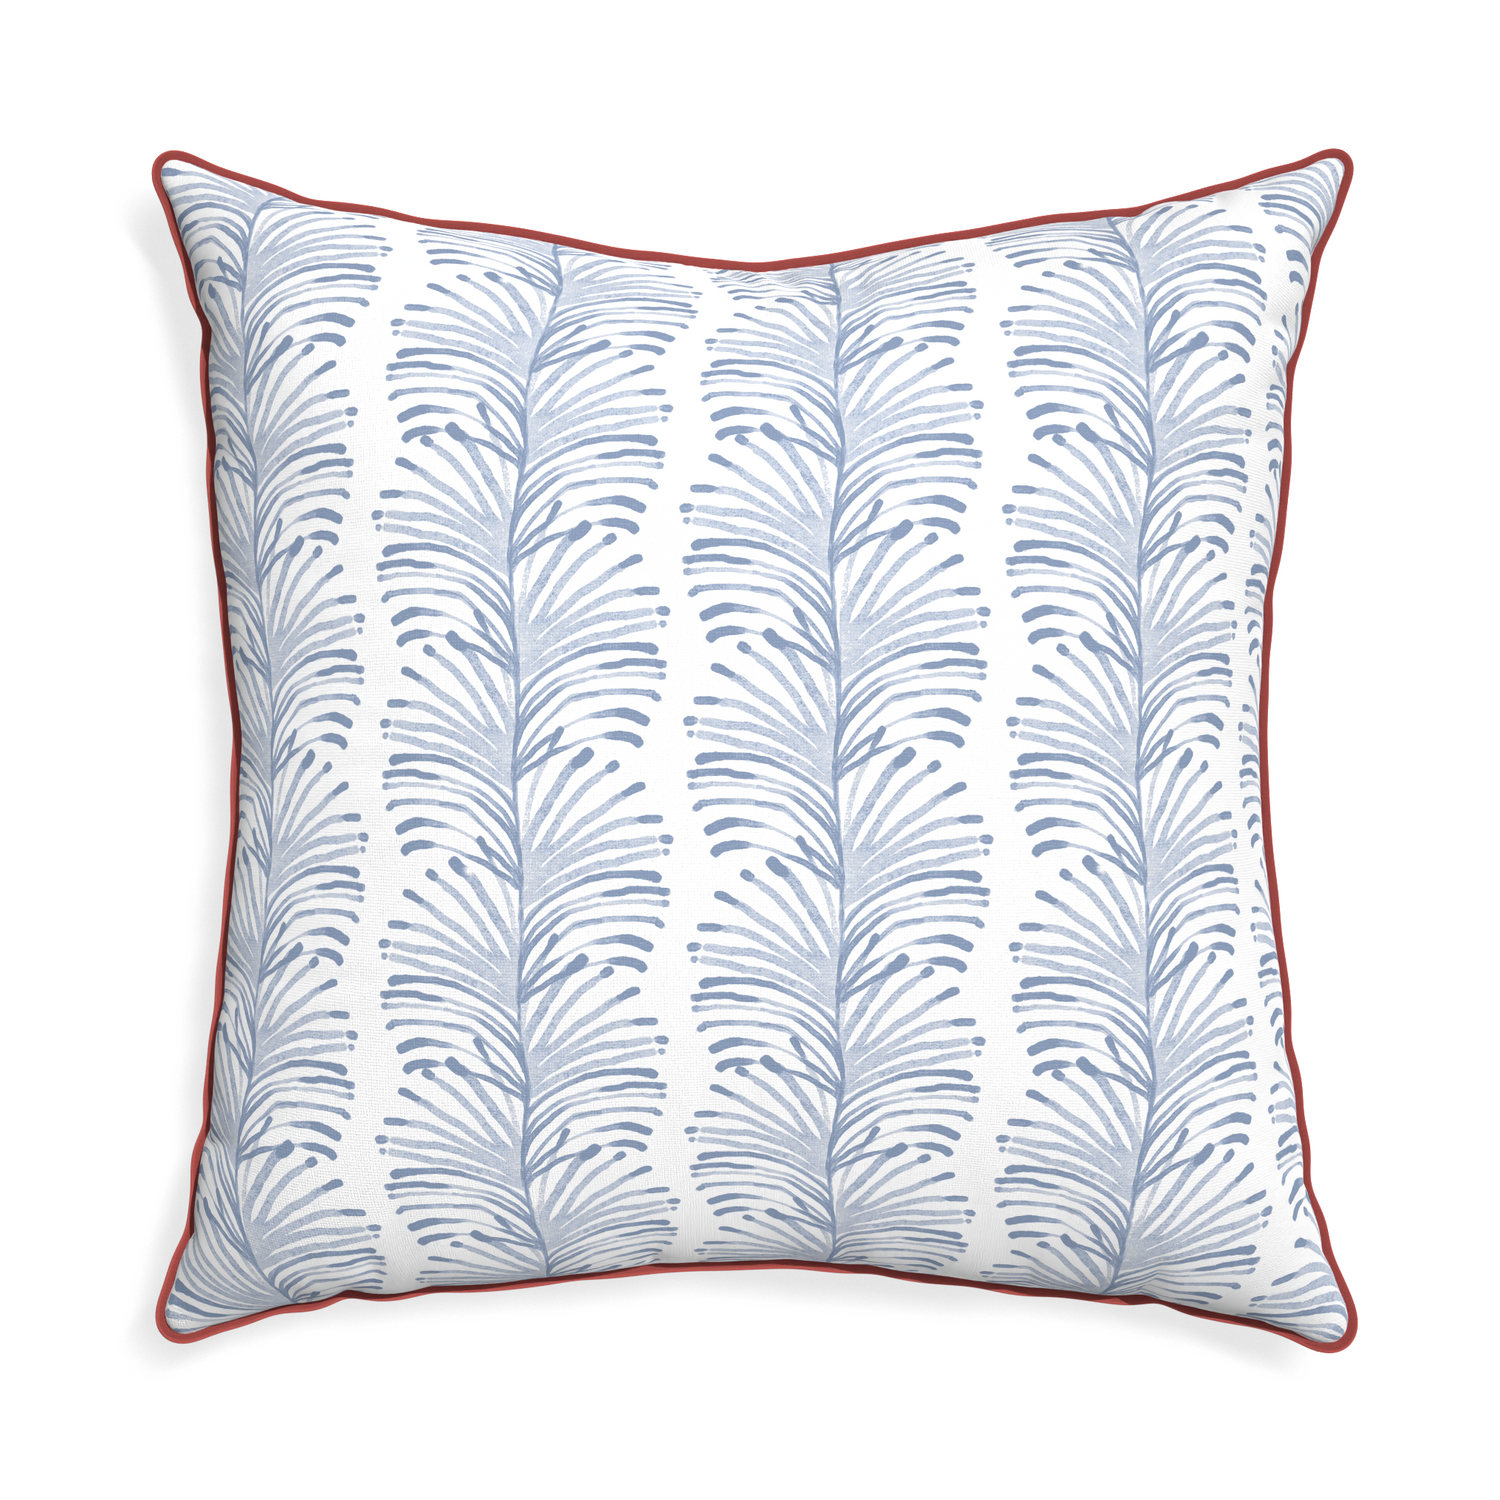 Euro-sham emma sky custom pillow with c piping on white background